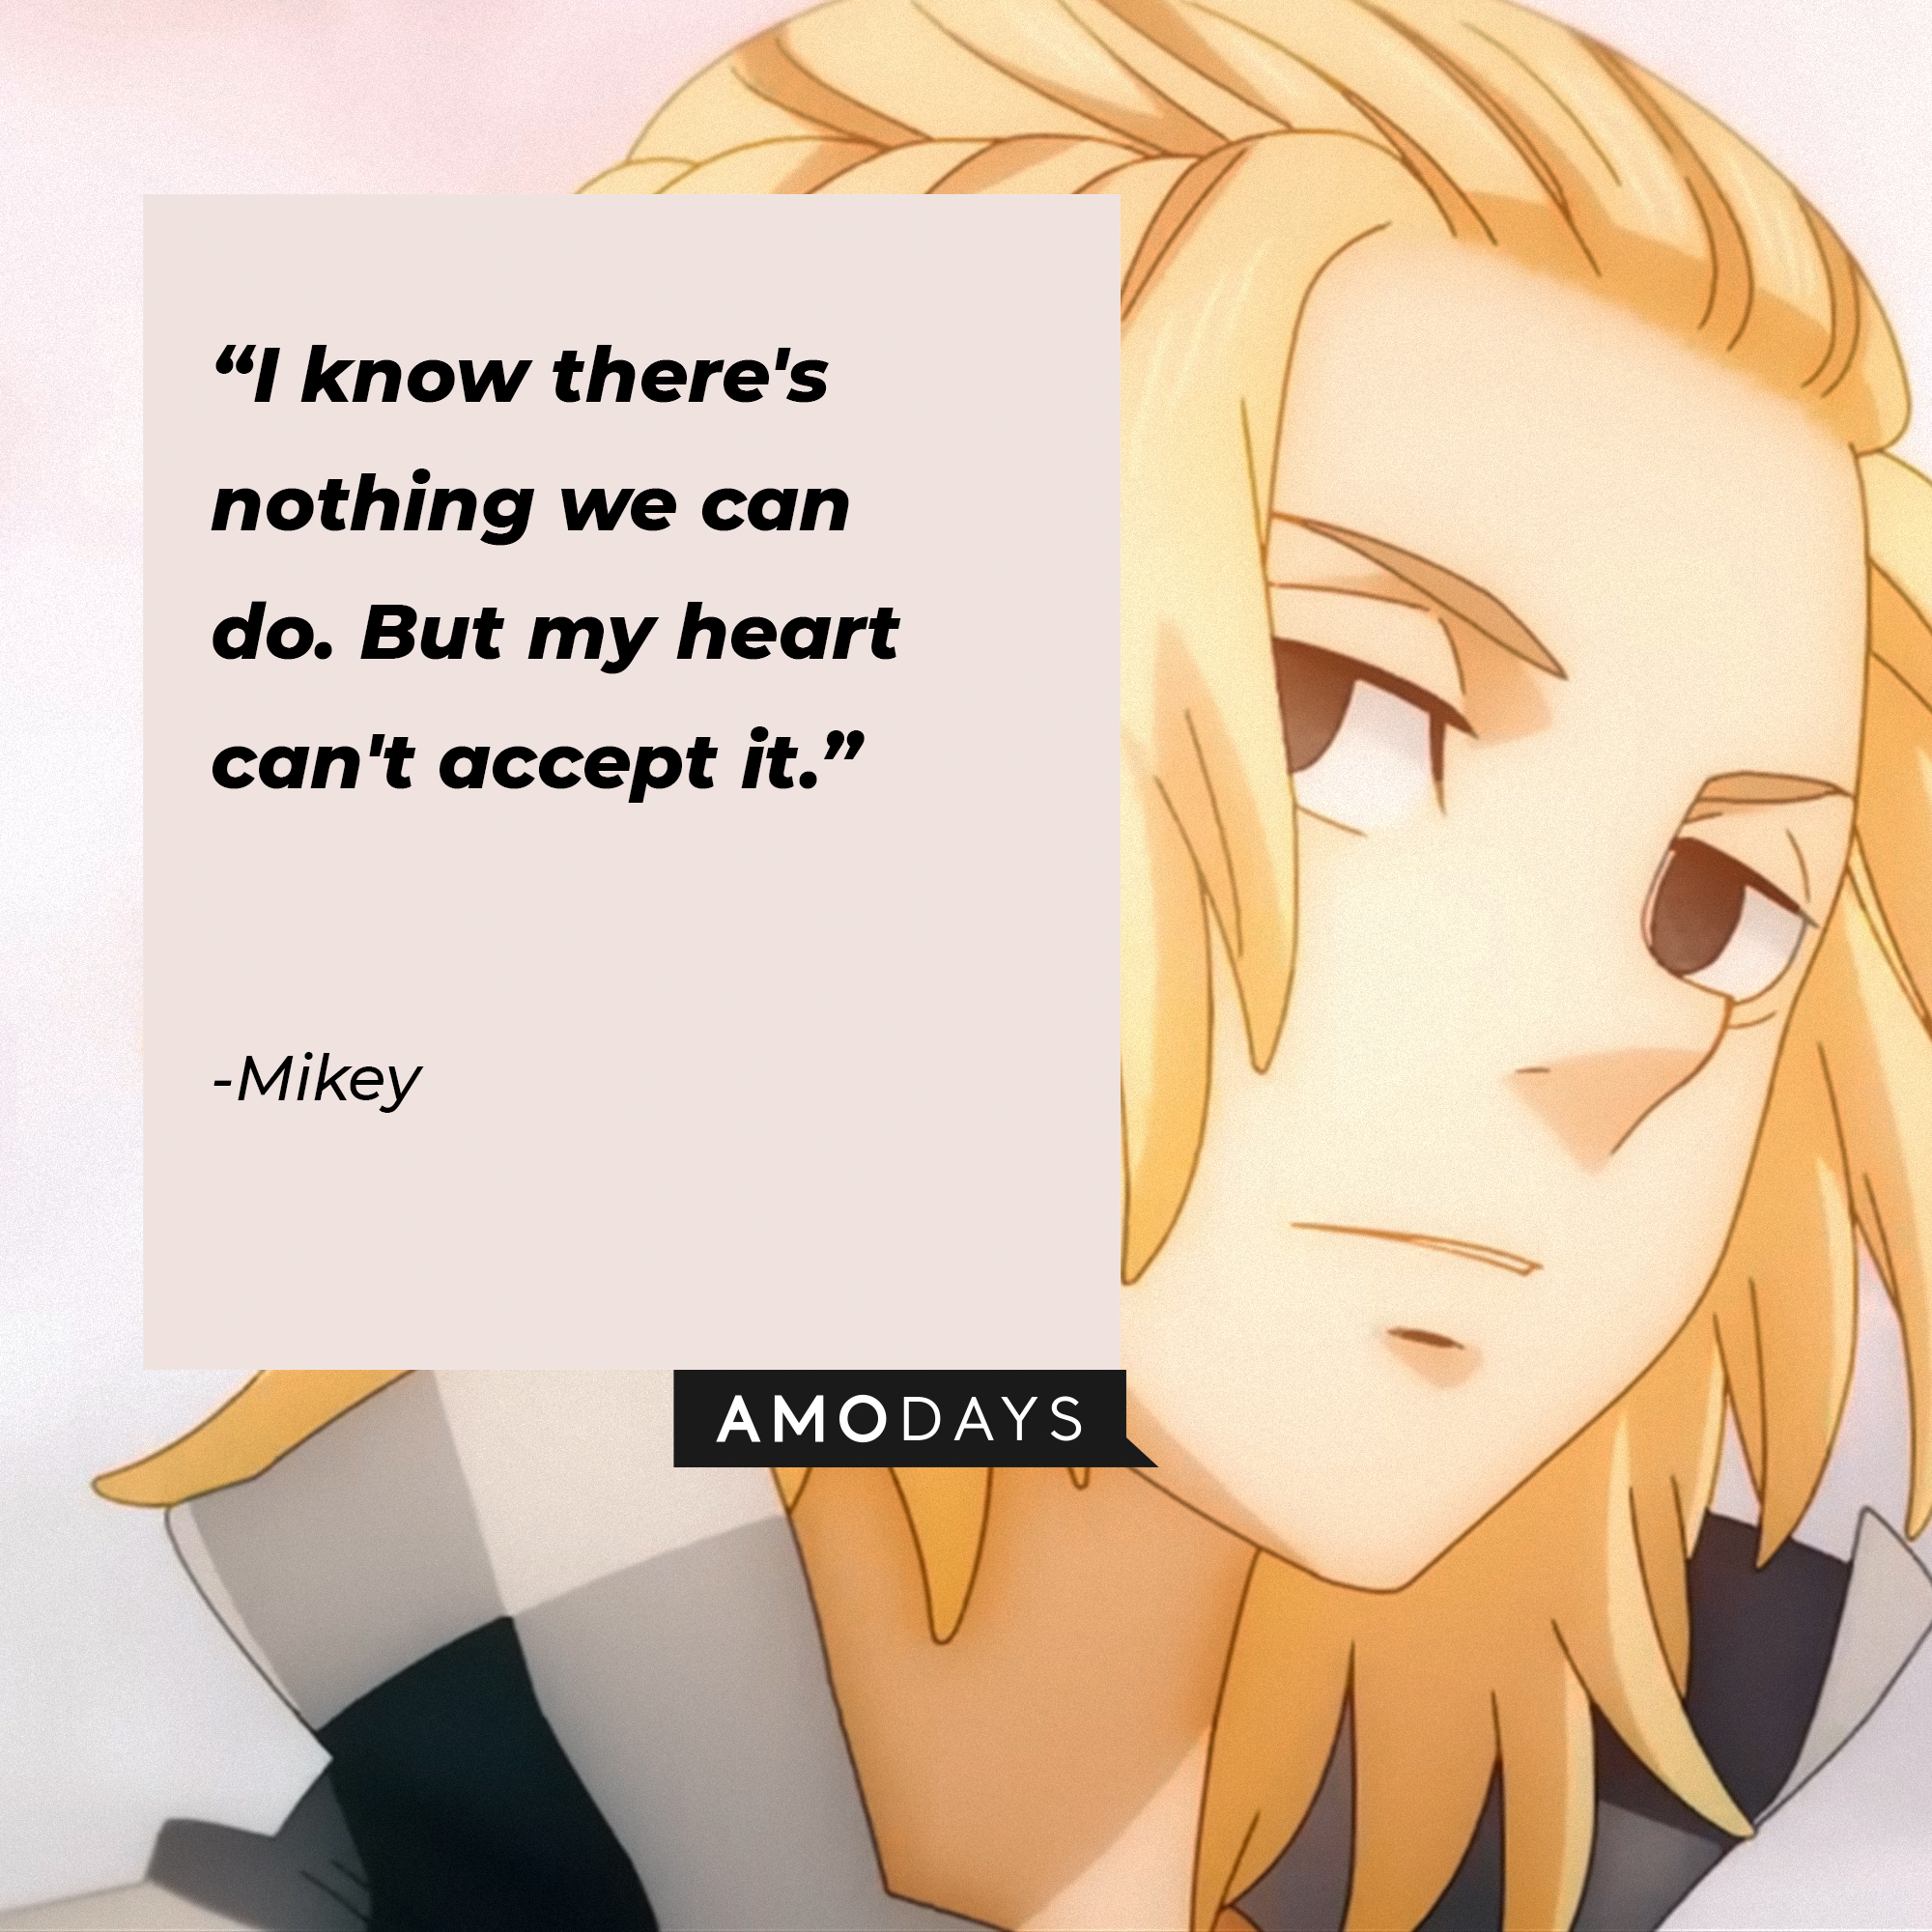 Mikey's quote: "I know there's nothing we can do. But my heart can't accept it." | Source: Youtube.com/Crunchyroll Collection